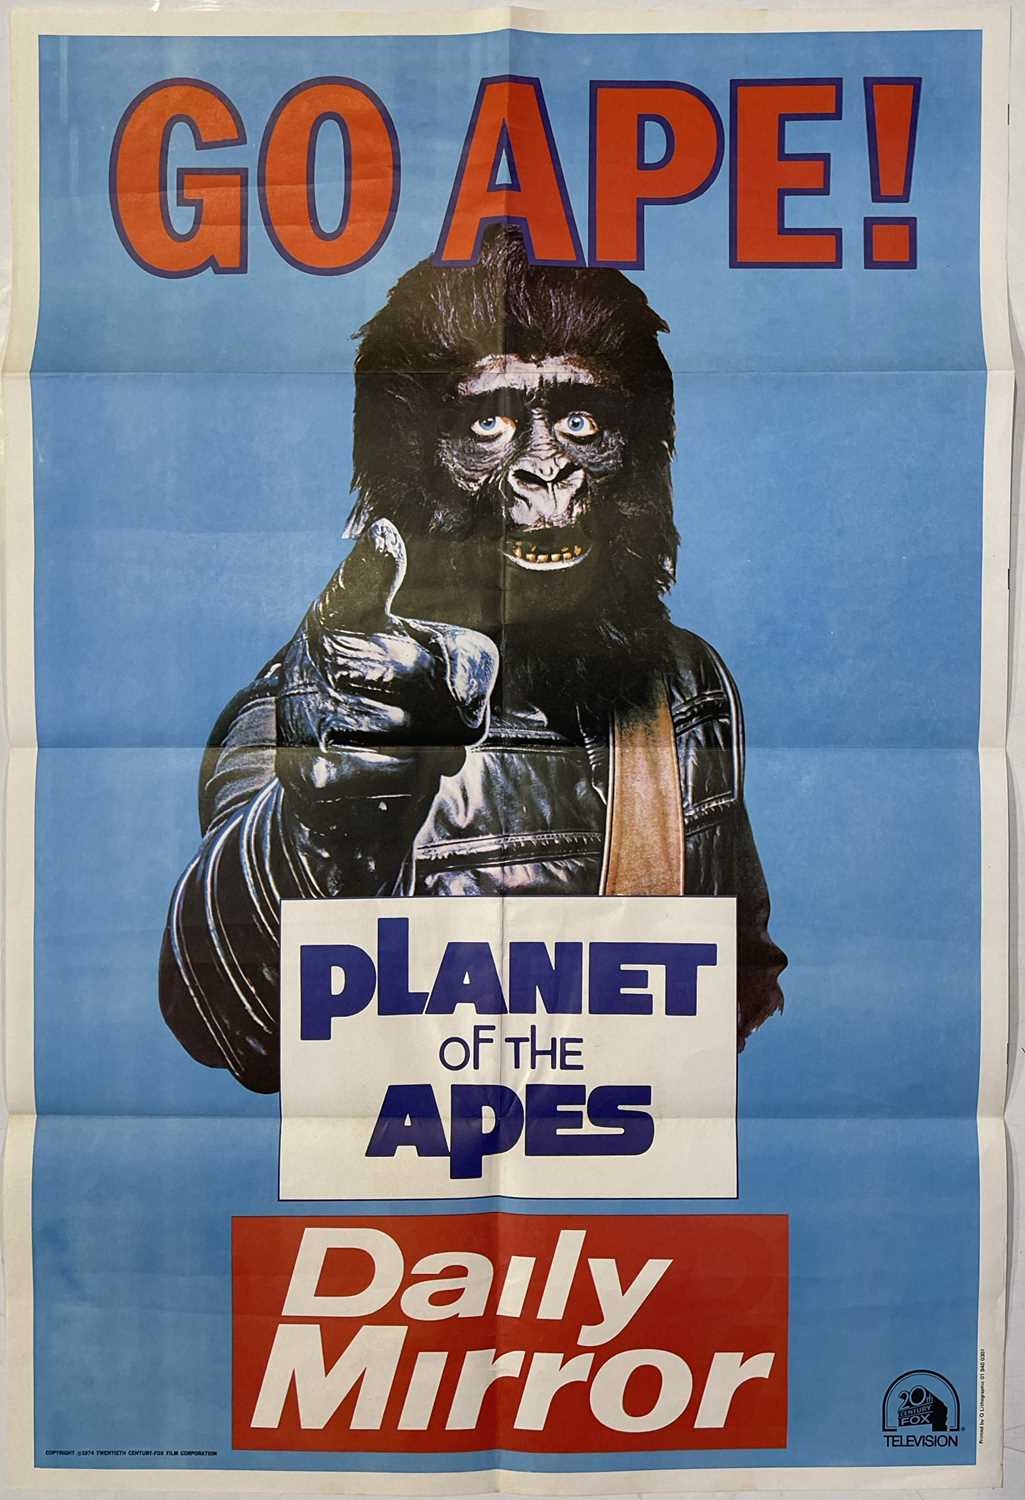 Lot 194 - PLANET OF THE APES (1974) GO APE! DAILY MIRROR PROMO POSTER.